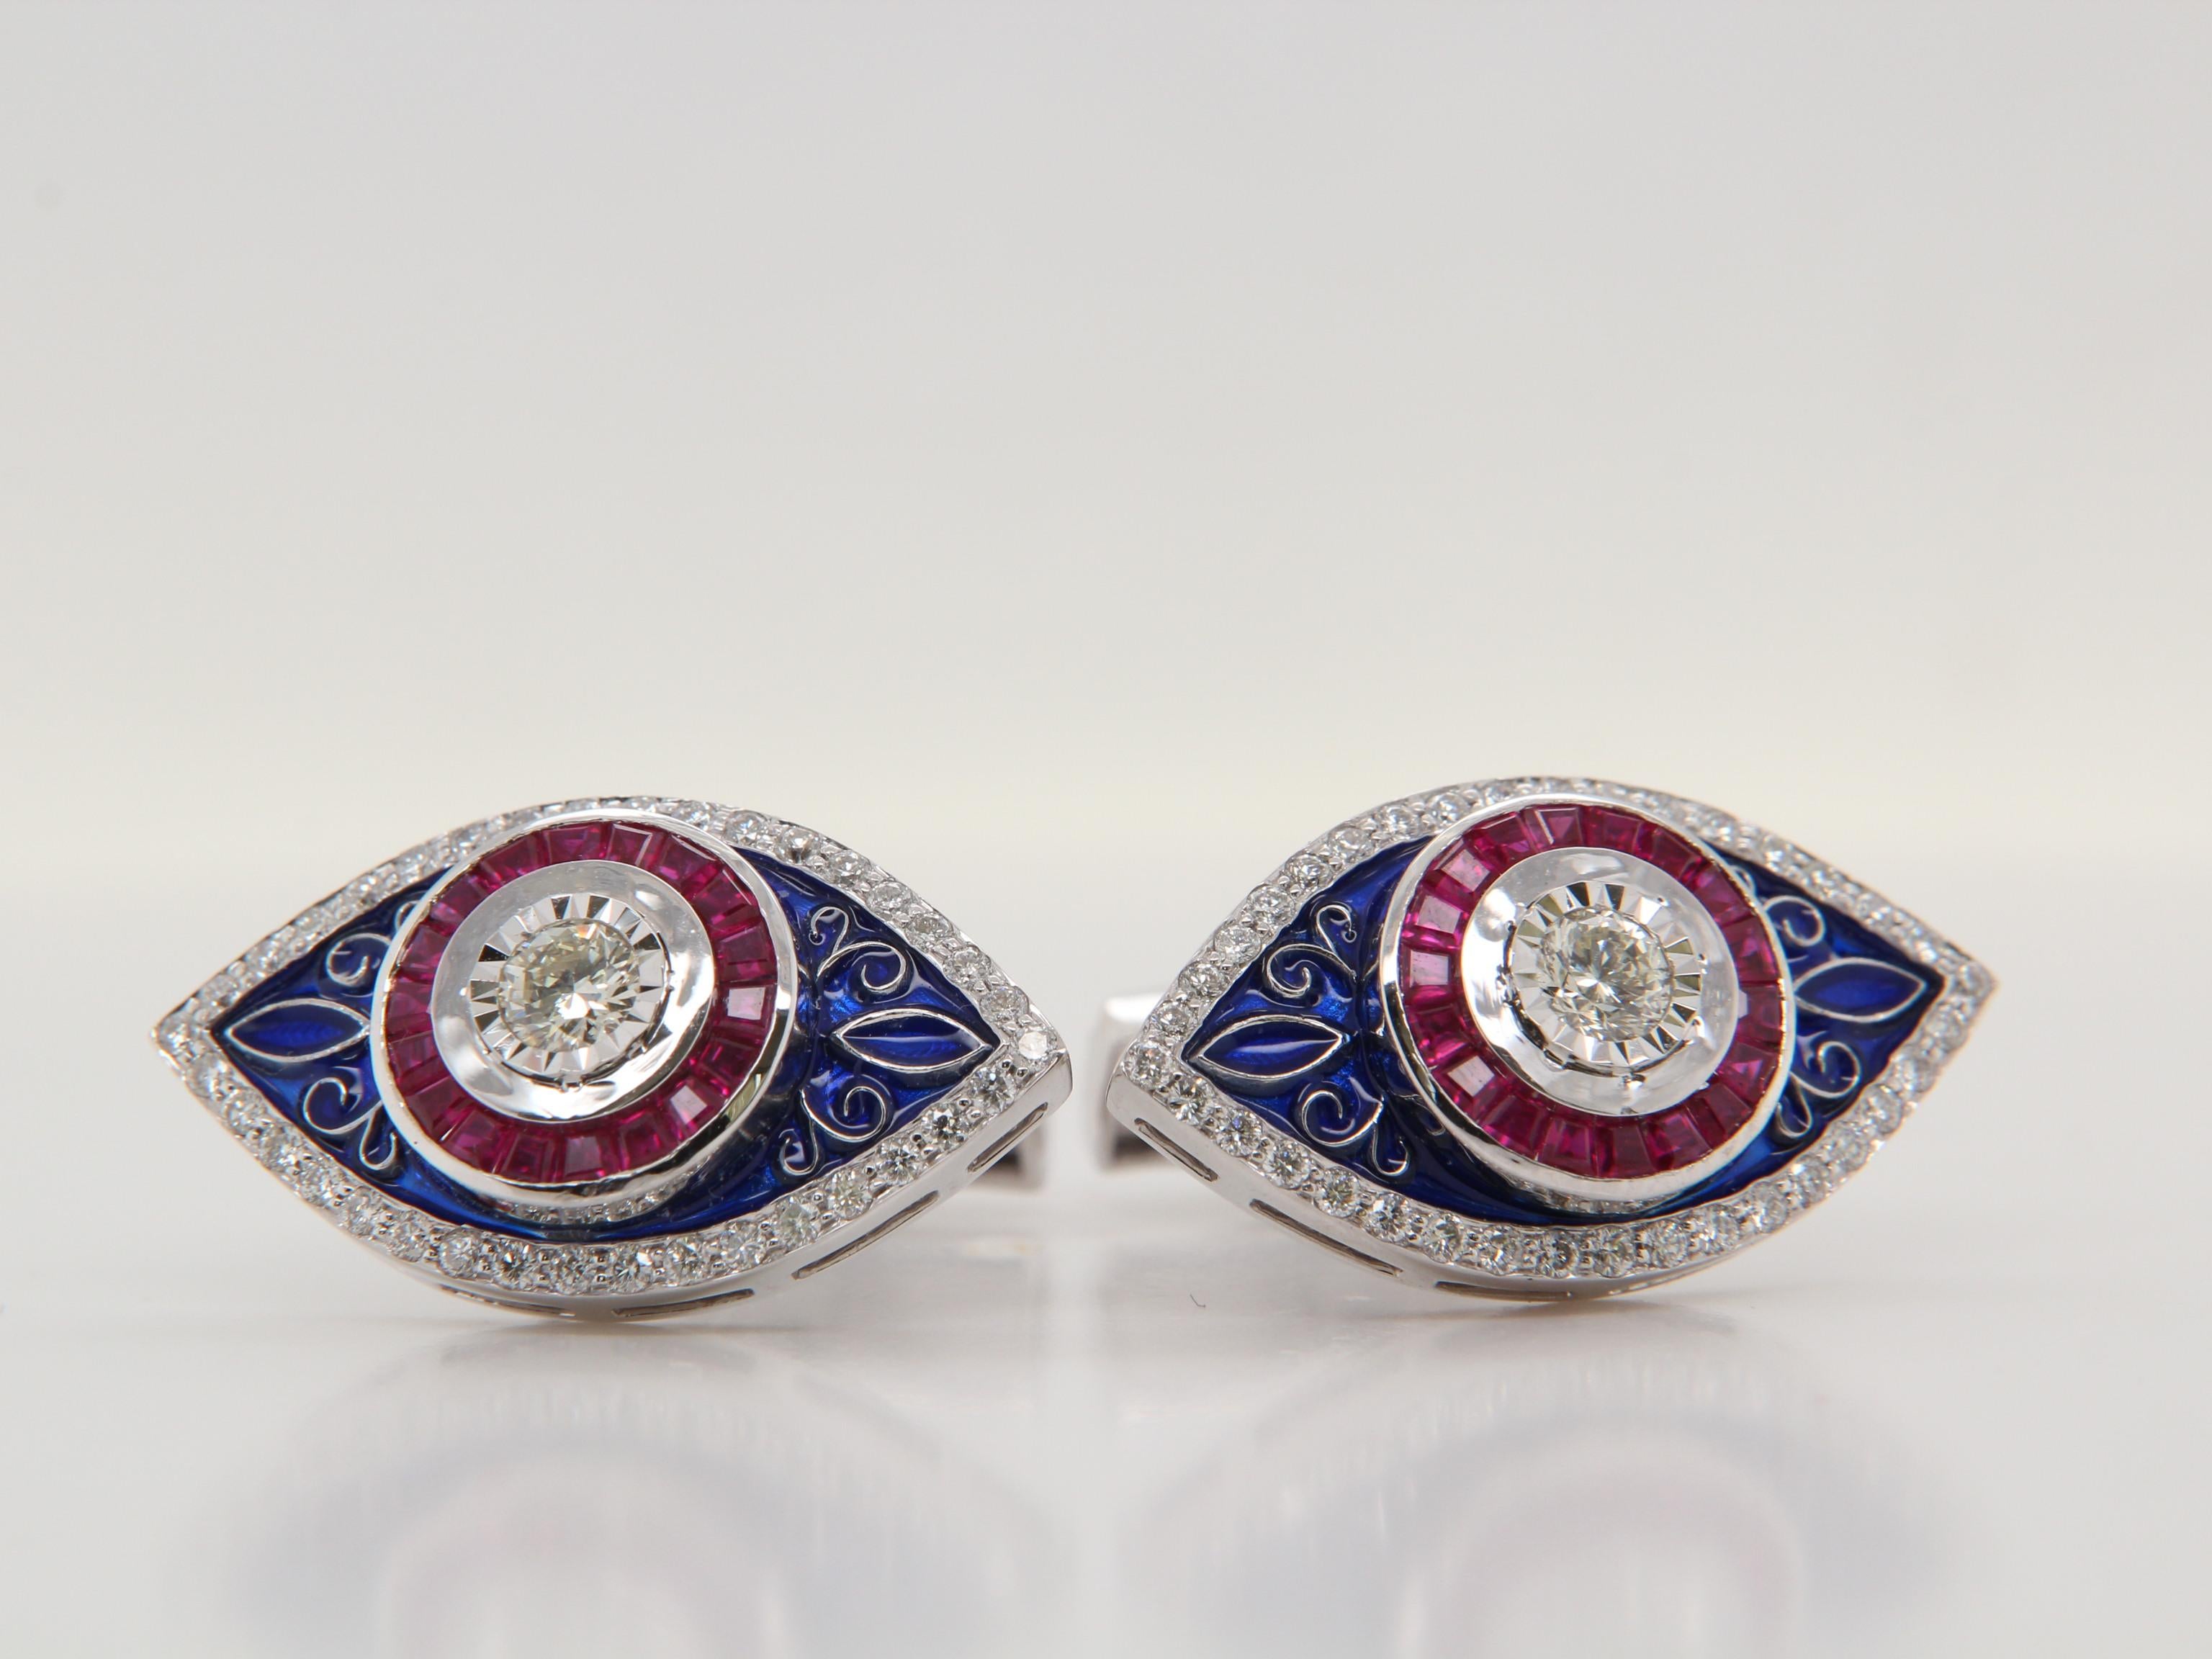 An important cufflink carefully crafted using diamond, ruby and enamel. These classy cufflinks will have you looking stylish, professional and confident, showcasing the versatility of the cufflinks.
These cufflinks were made in 18 Karat gold in